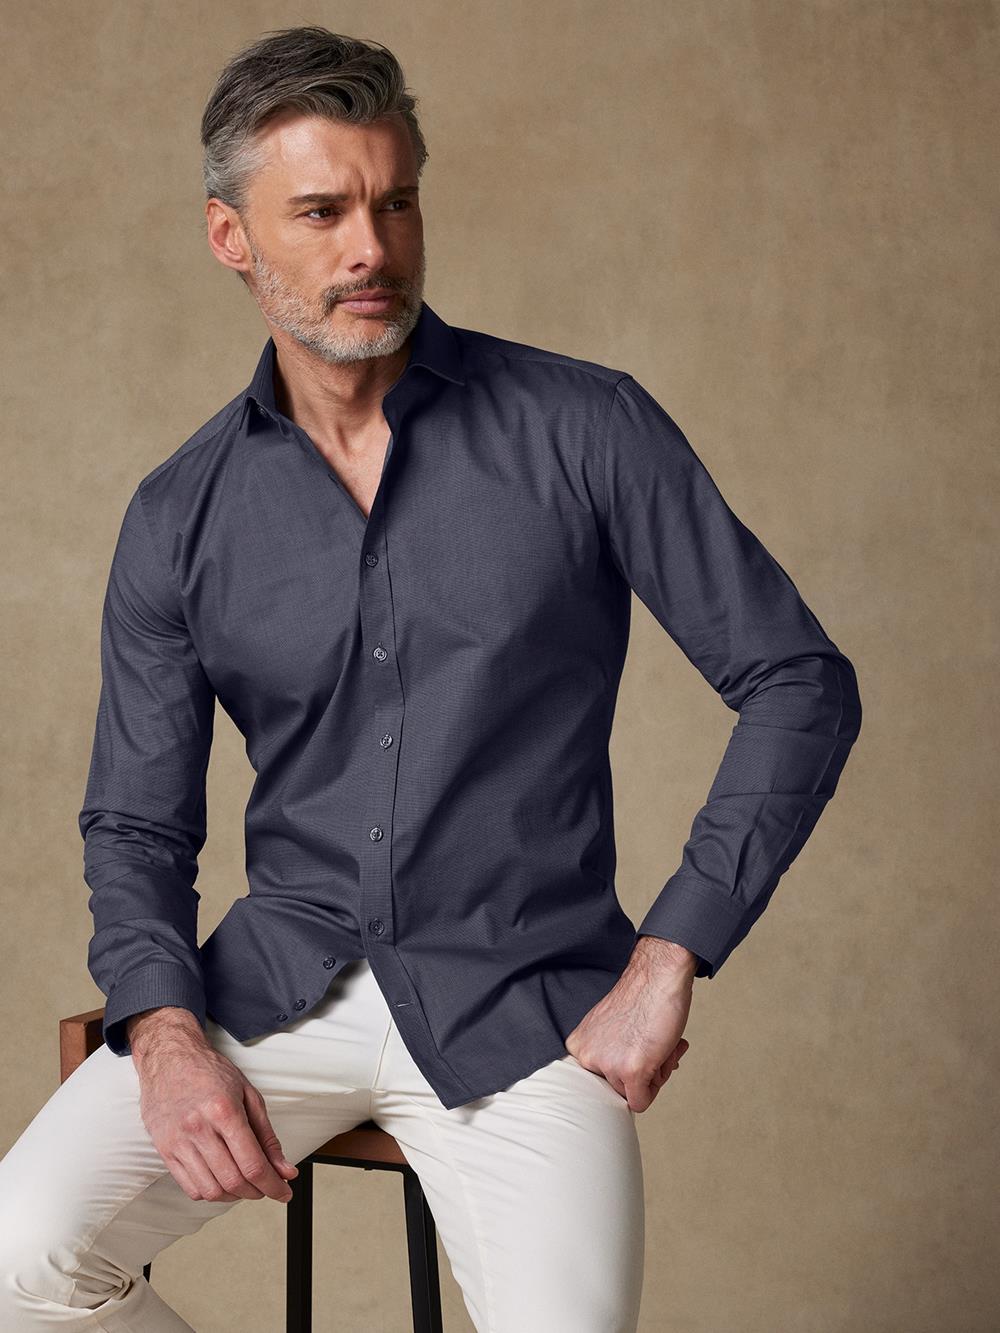 Bob anthracite micro-oxford slim fit shirt - Extra long sleeves